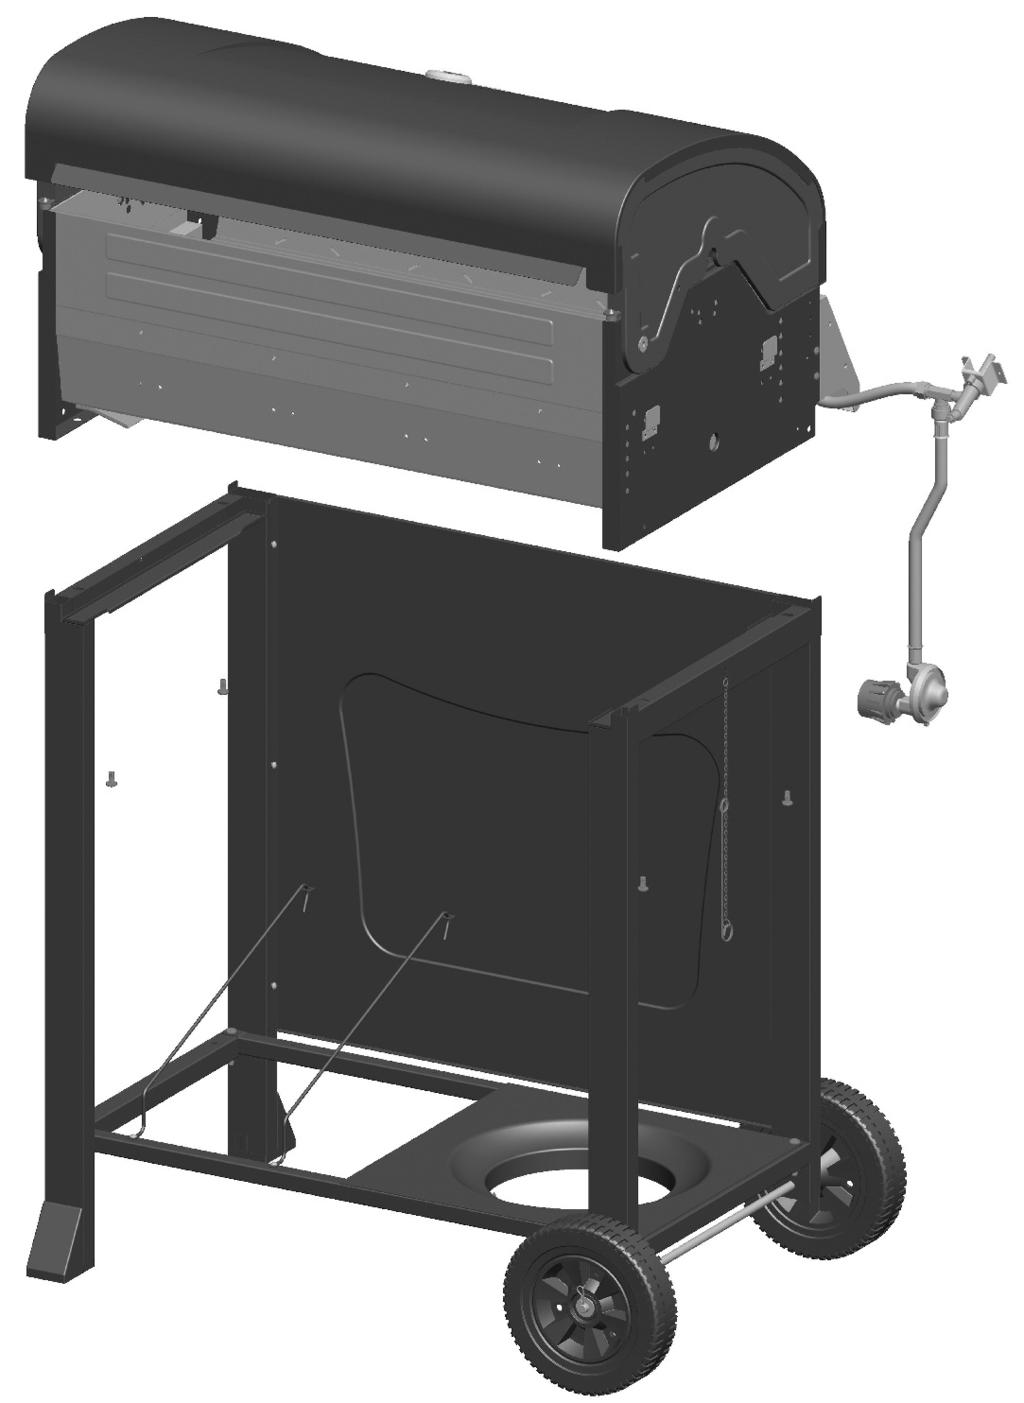 5 Grill Head to Cart Stand cart upright. This step requires two people to lift and position grill head onto cart.